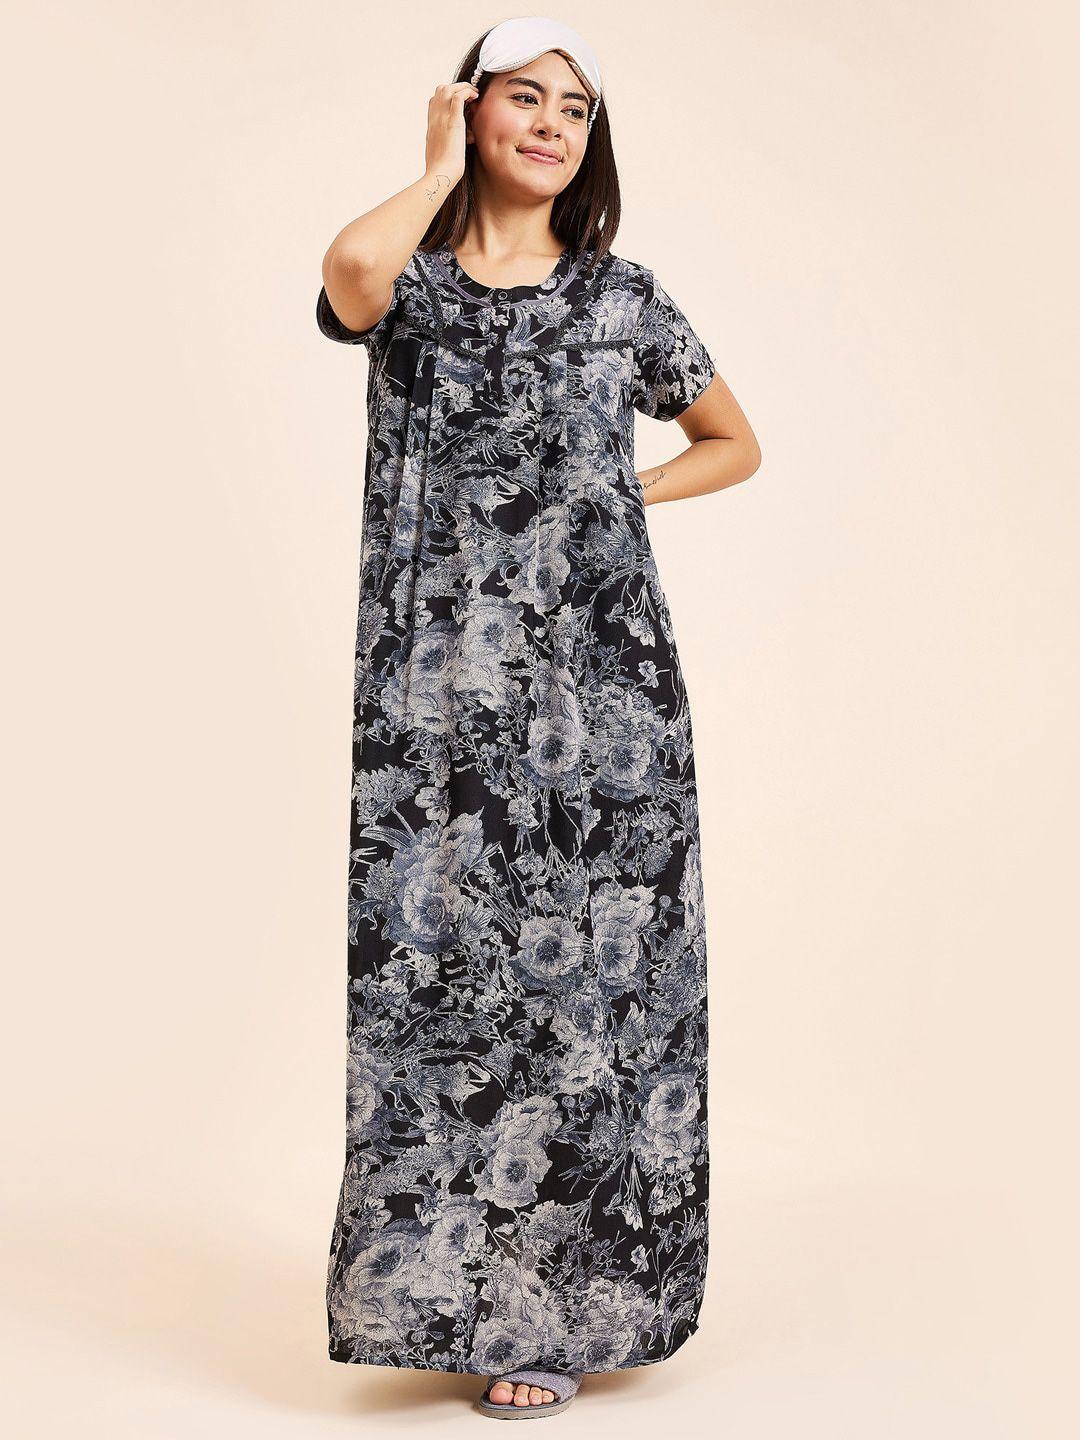 sweet dreams floral printed round neck short sleeves pure cotton maxi nightdress